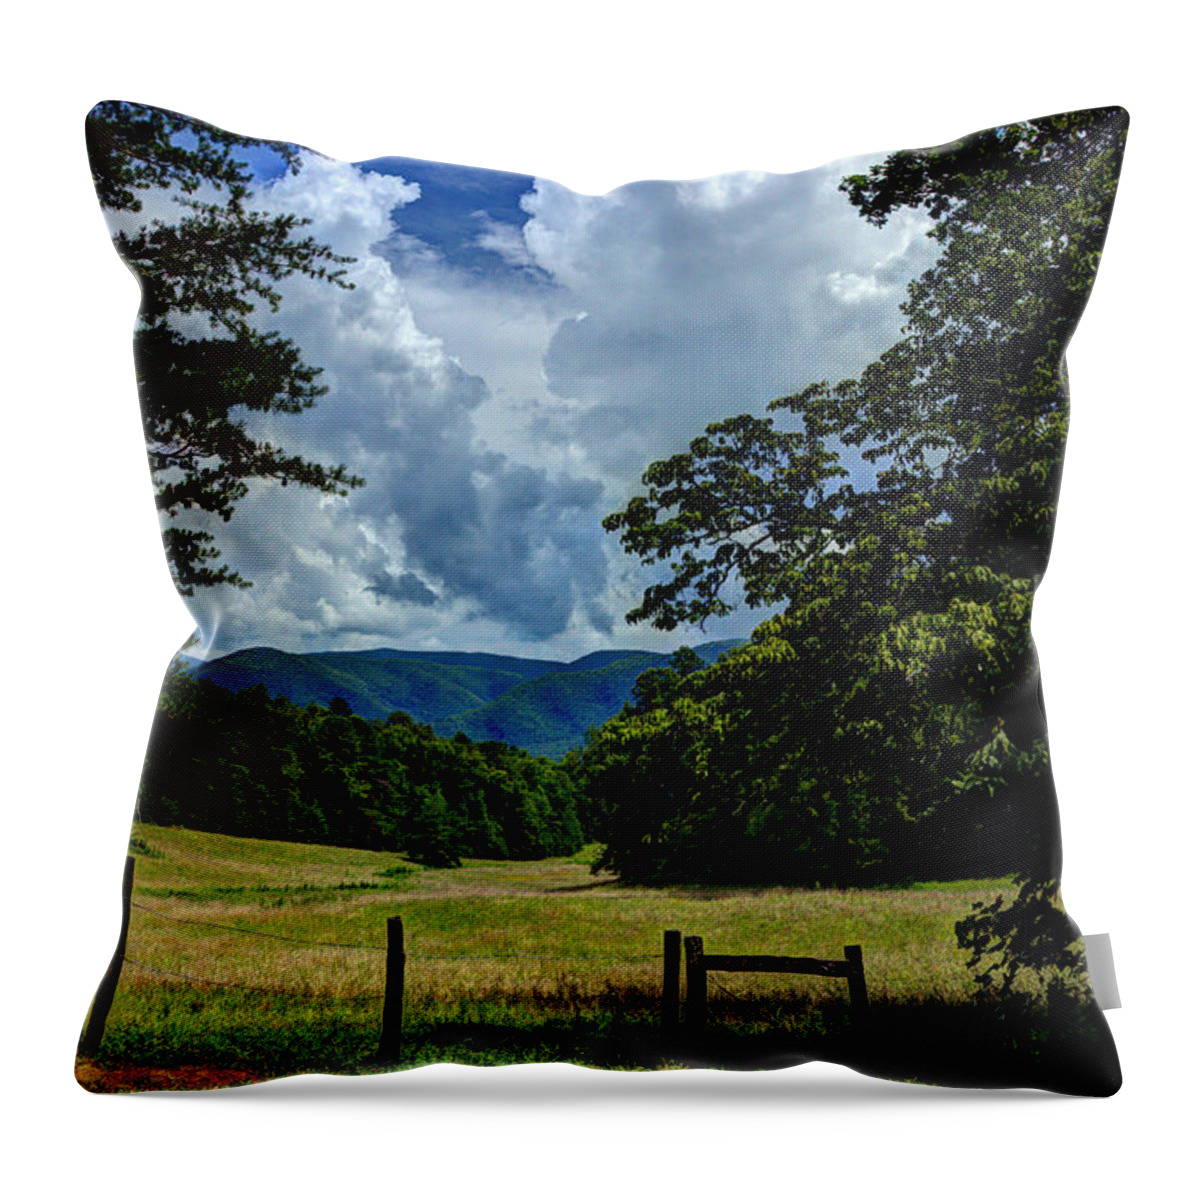 Cades Cove Throw Pillow featuring the photograph Welcome To The Smokies by Michael Eingle